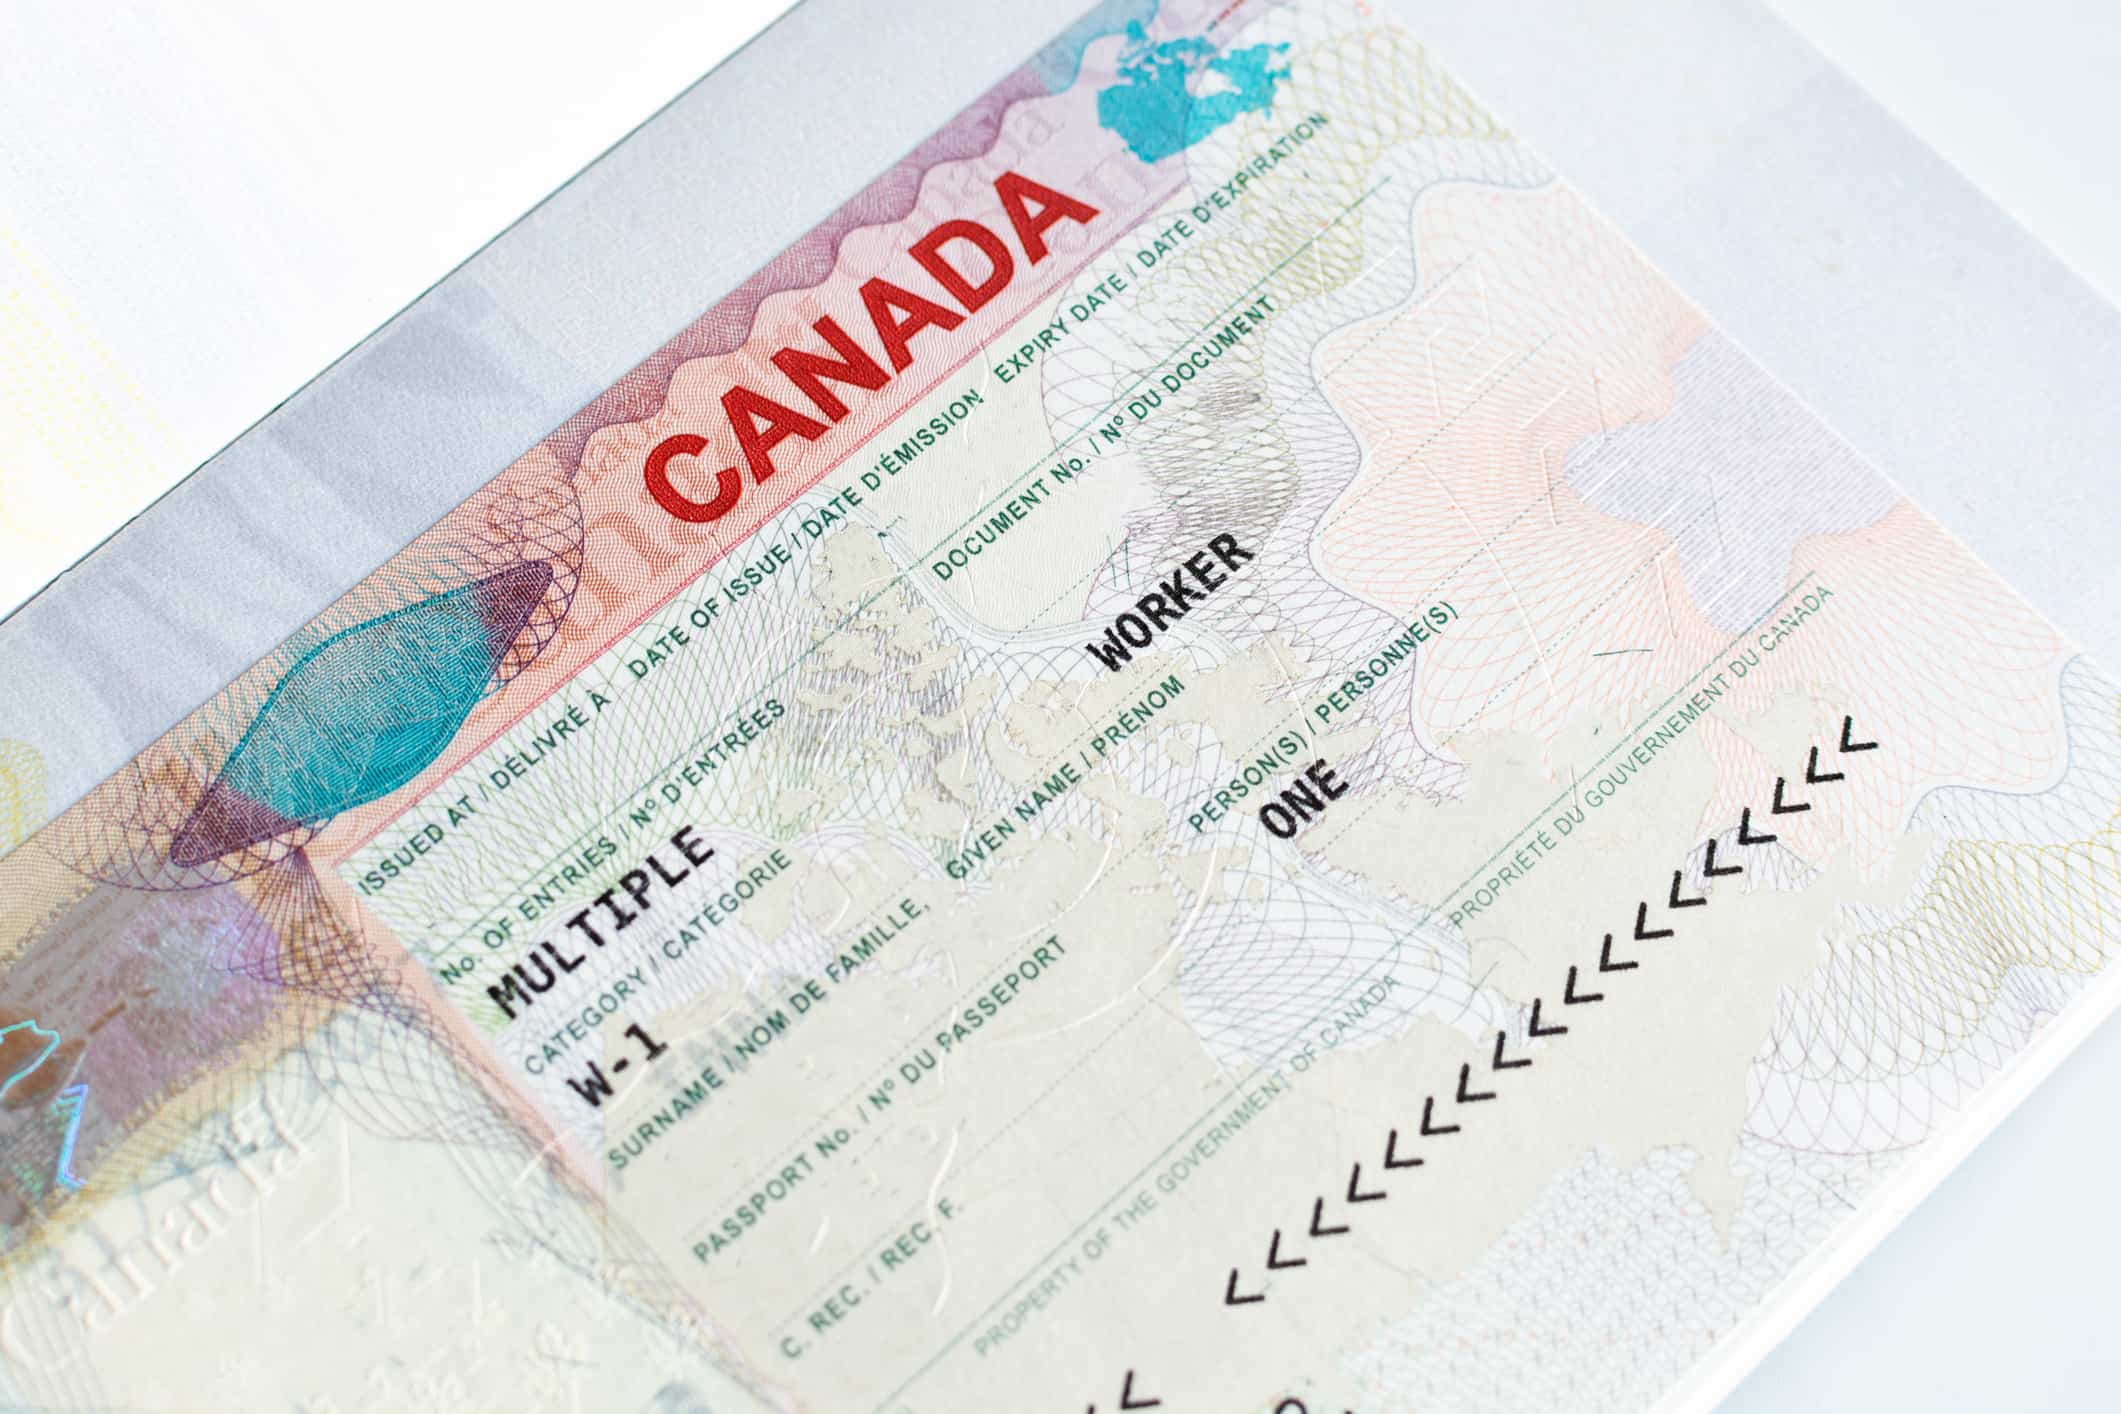 Visitors Can Now Apply For Work Permits Without Leaving Canada - ITC News